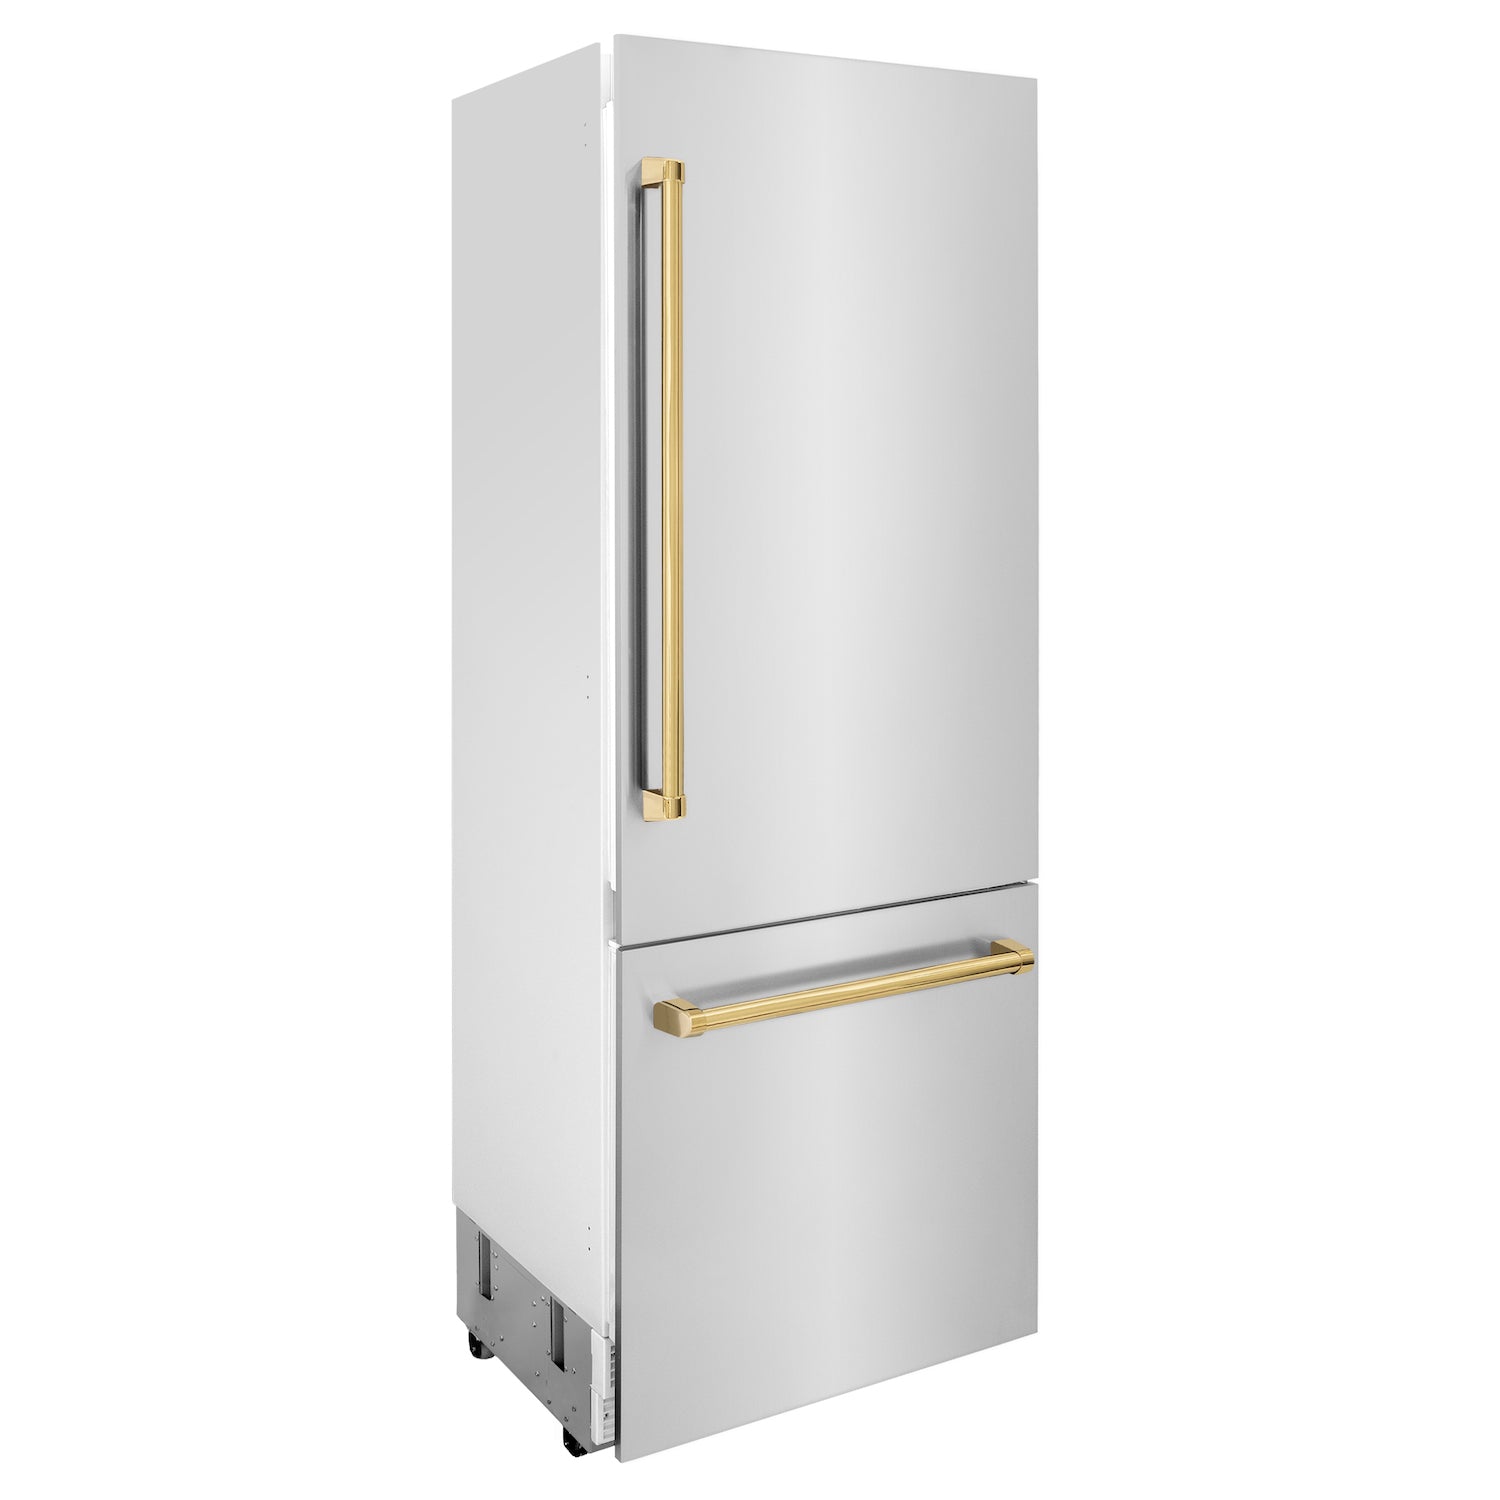 ZLINE 30" Autograph Edition Built-in Refrigerator with Accent Handle side.